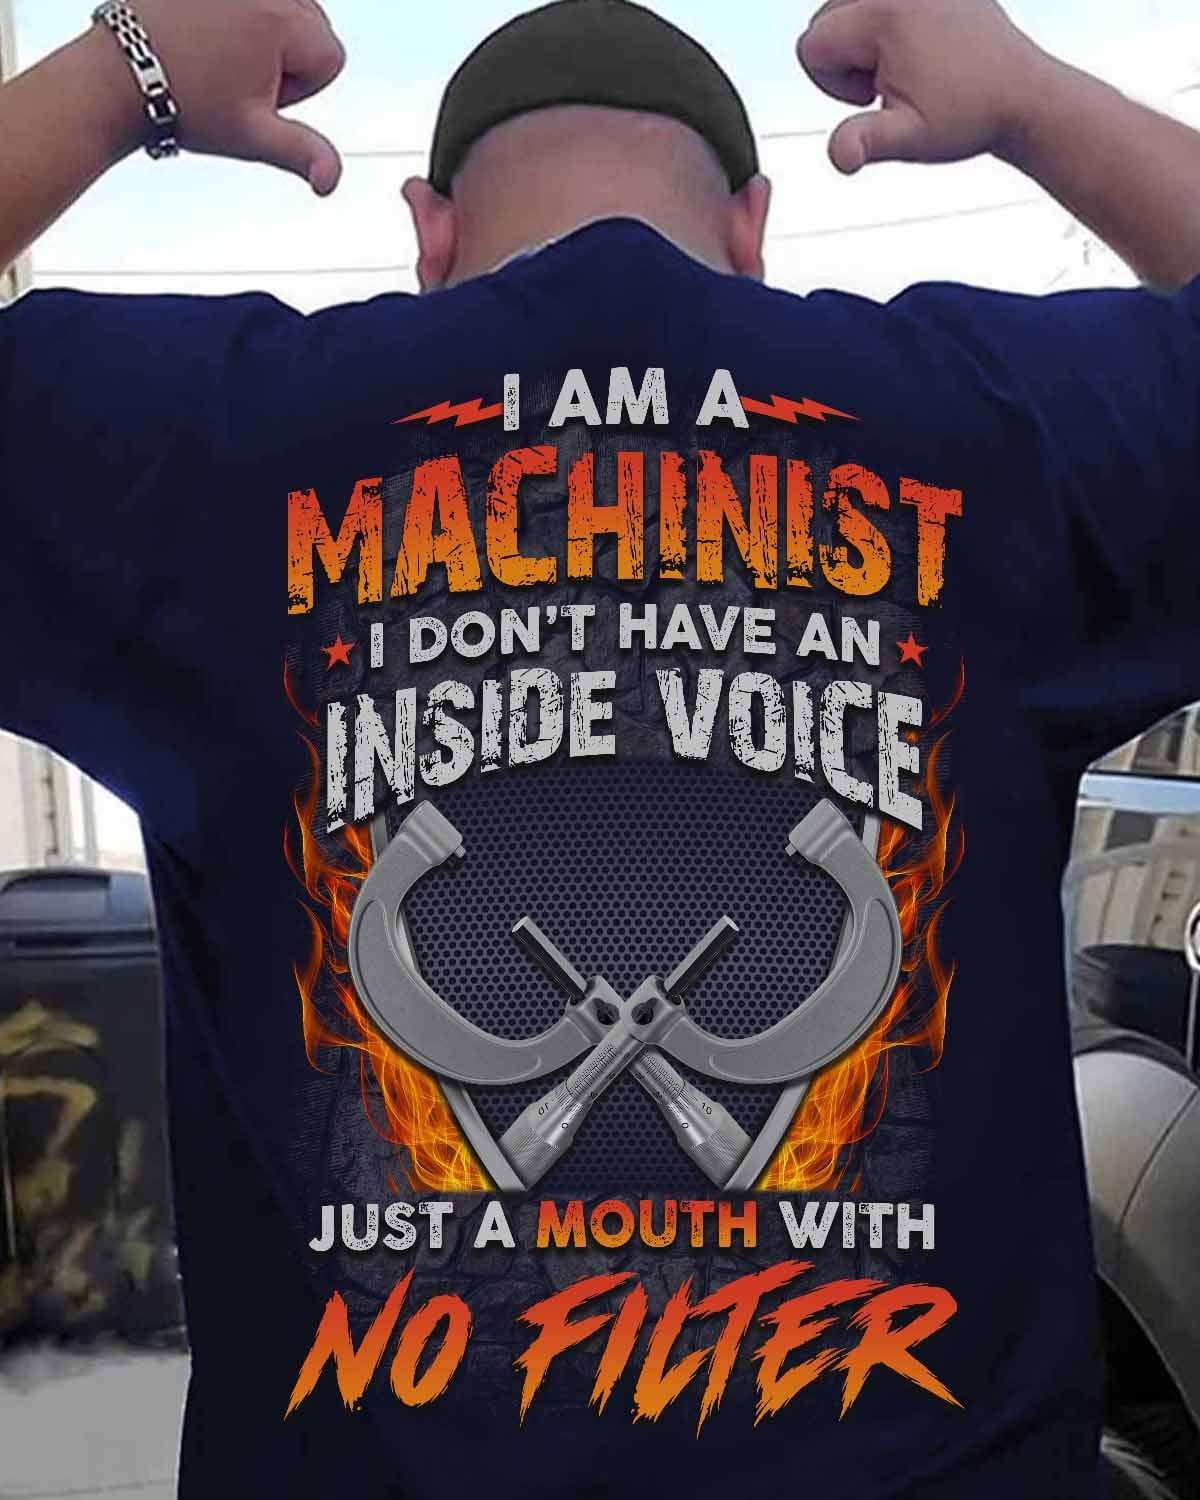 I am a machinist I don't have an inside voice just a mouth with no filter - Machinist the job